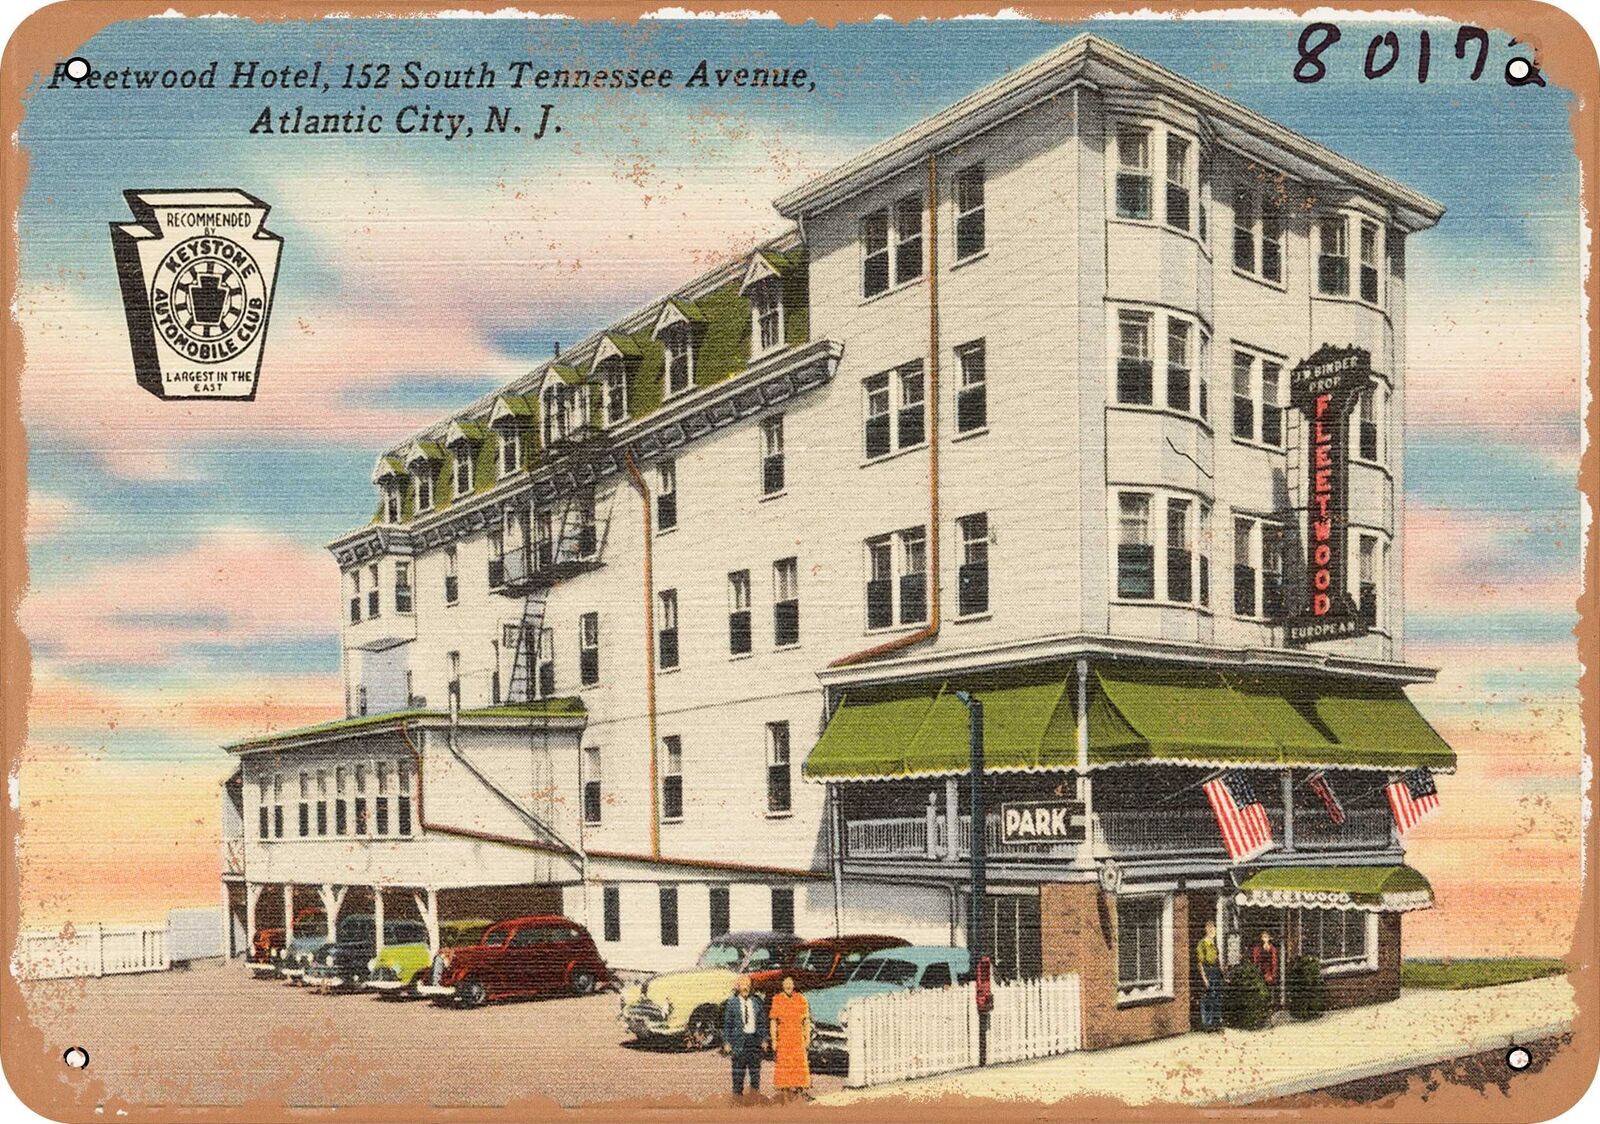 Metal Sign - New Jersey Postcard - Fleetwood Hotel, 152 South Tennessee Avenue,